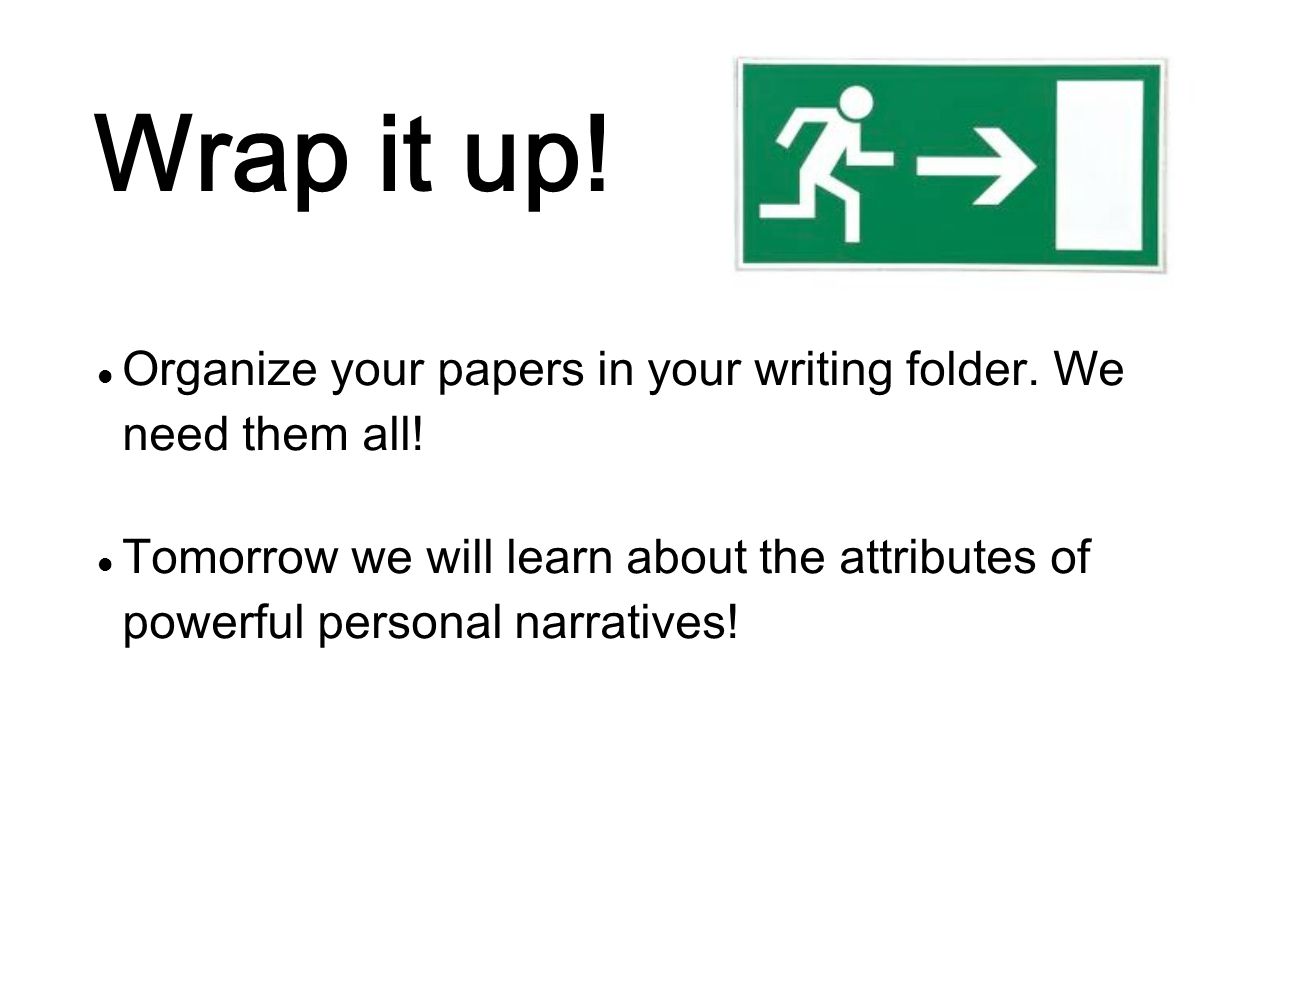 Wrap it up! Organize your papers in your writing folder. We need them all!